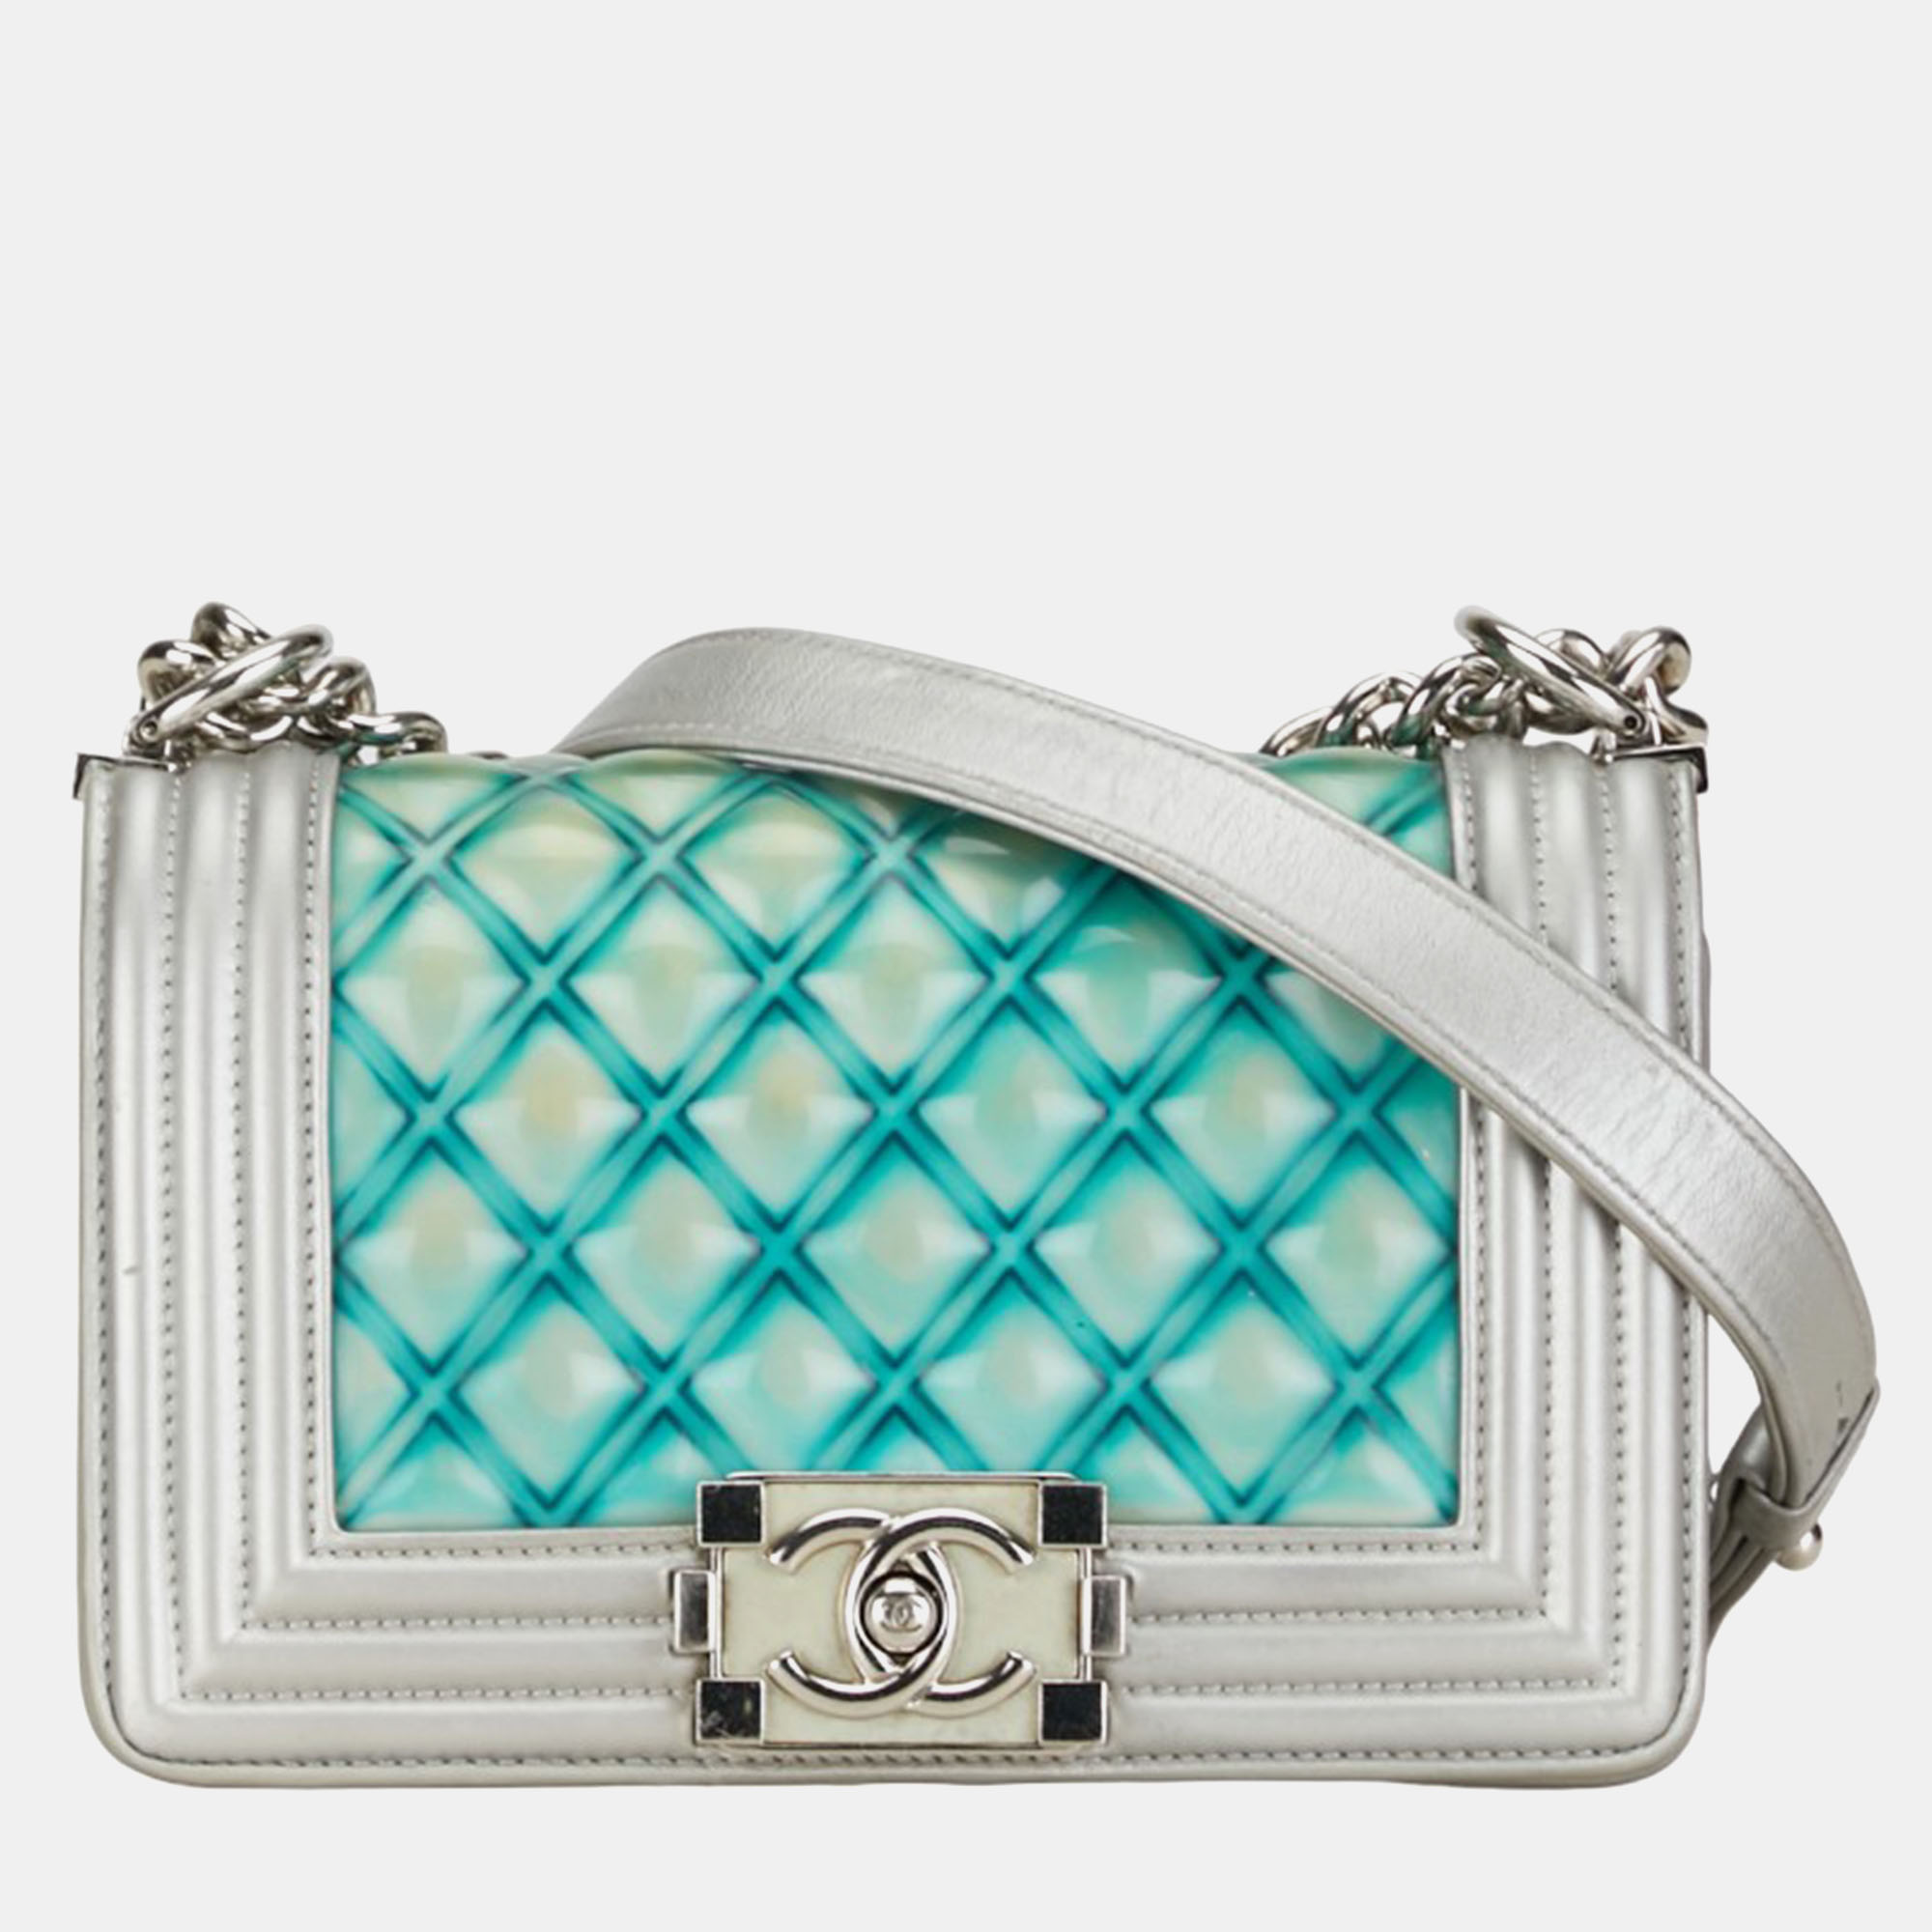 Chanel silver metallic leather classic small water boy bag